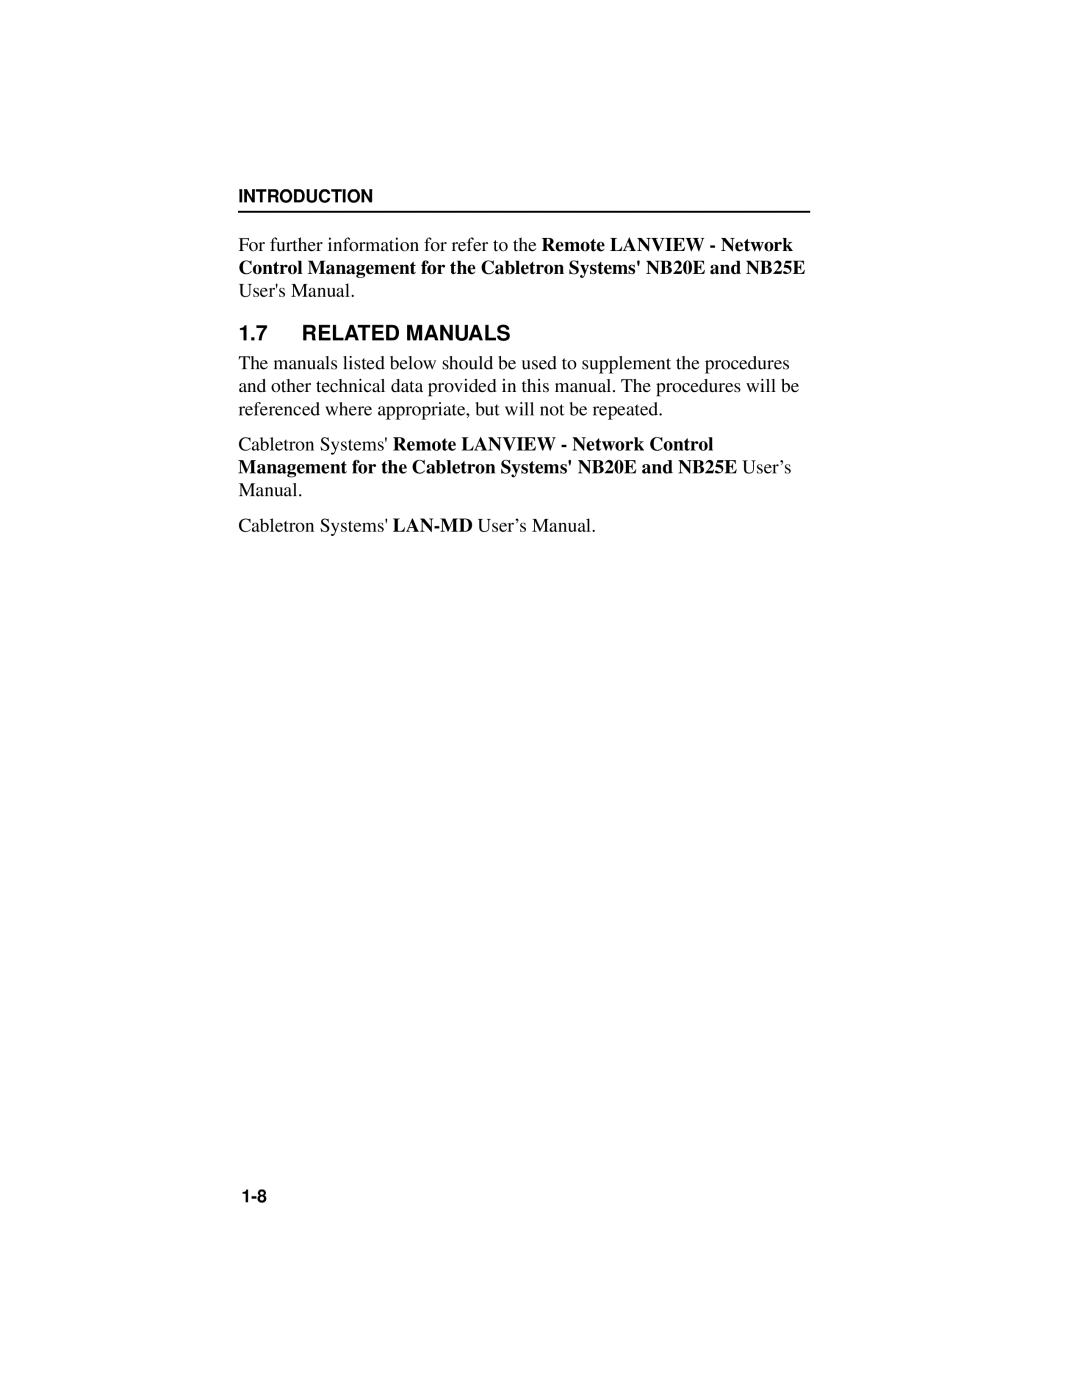 Cabletron Systems NB20E, NB25 E user manual Related Manuals 